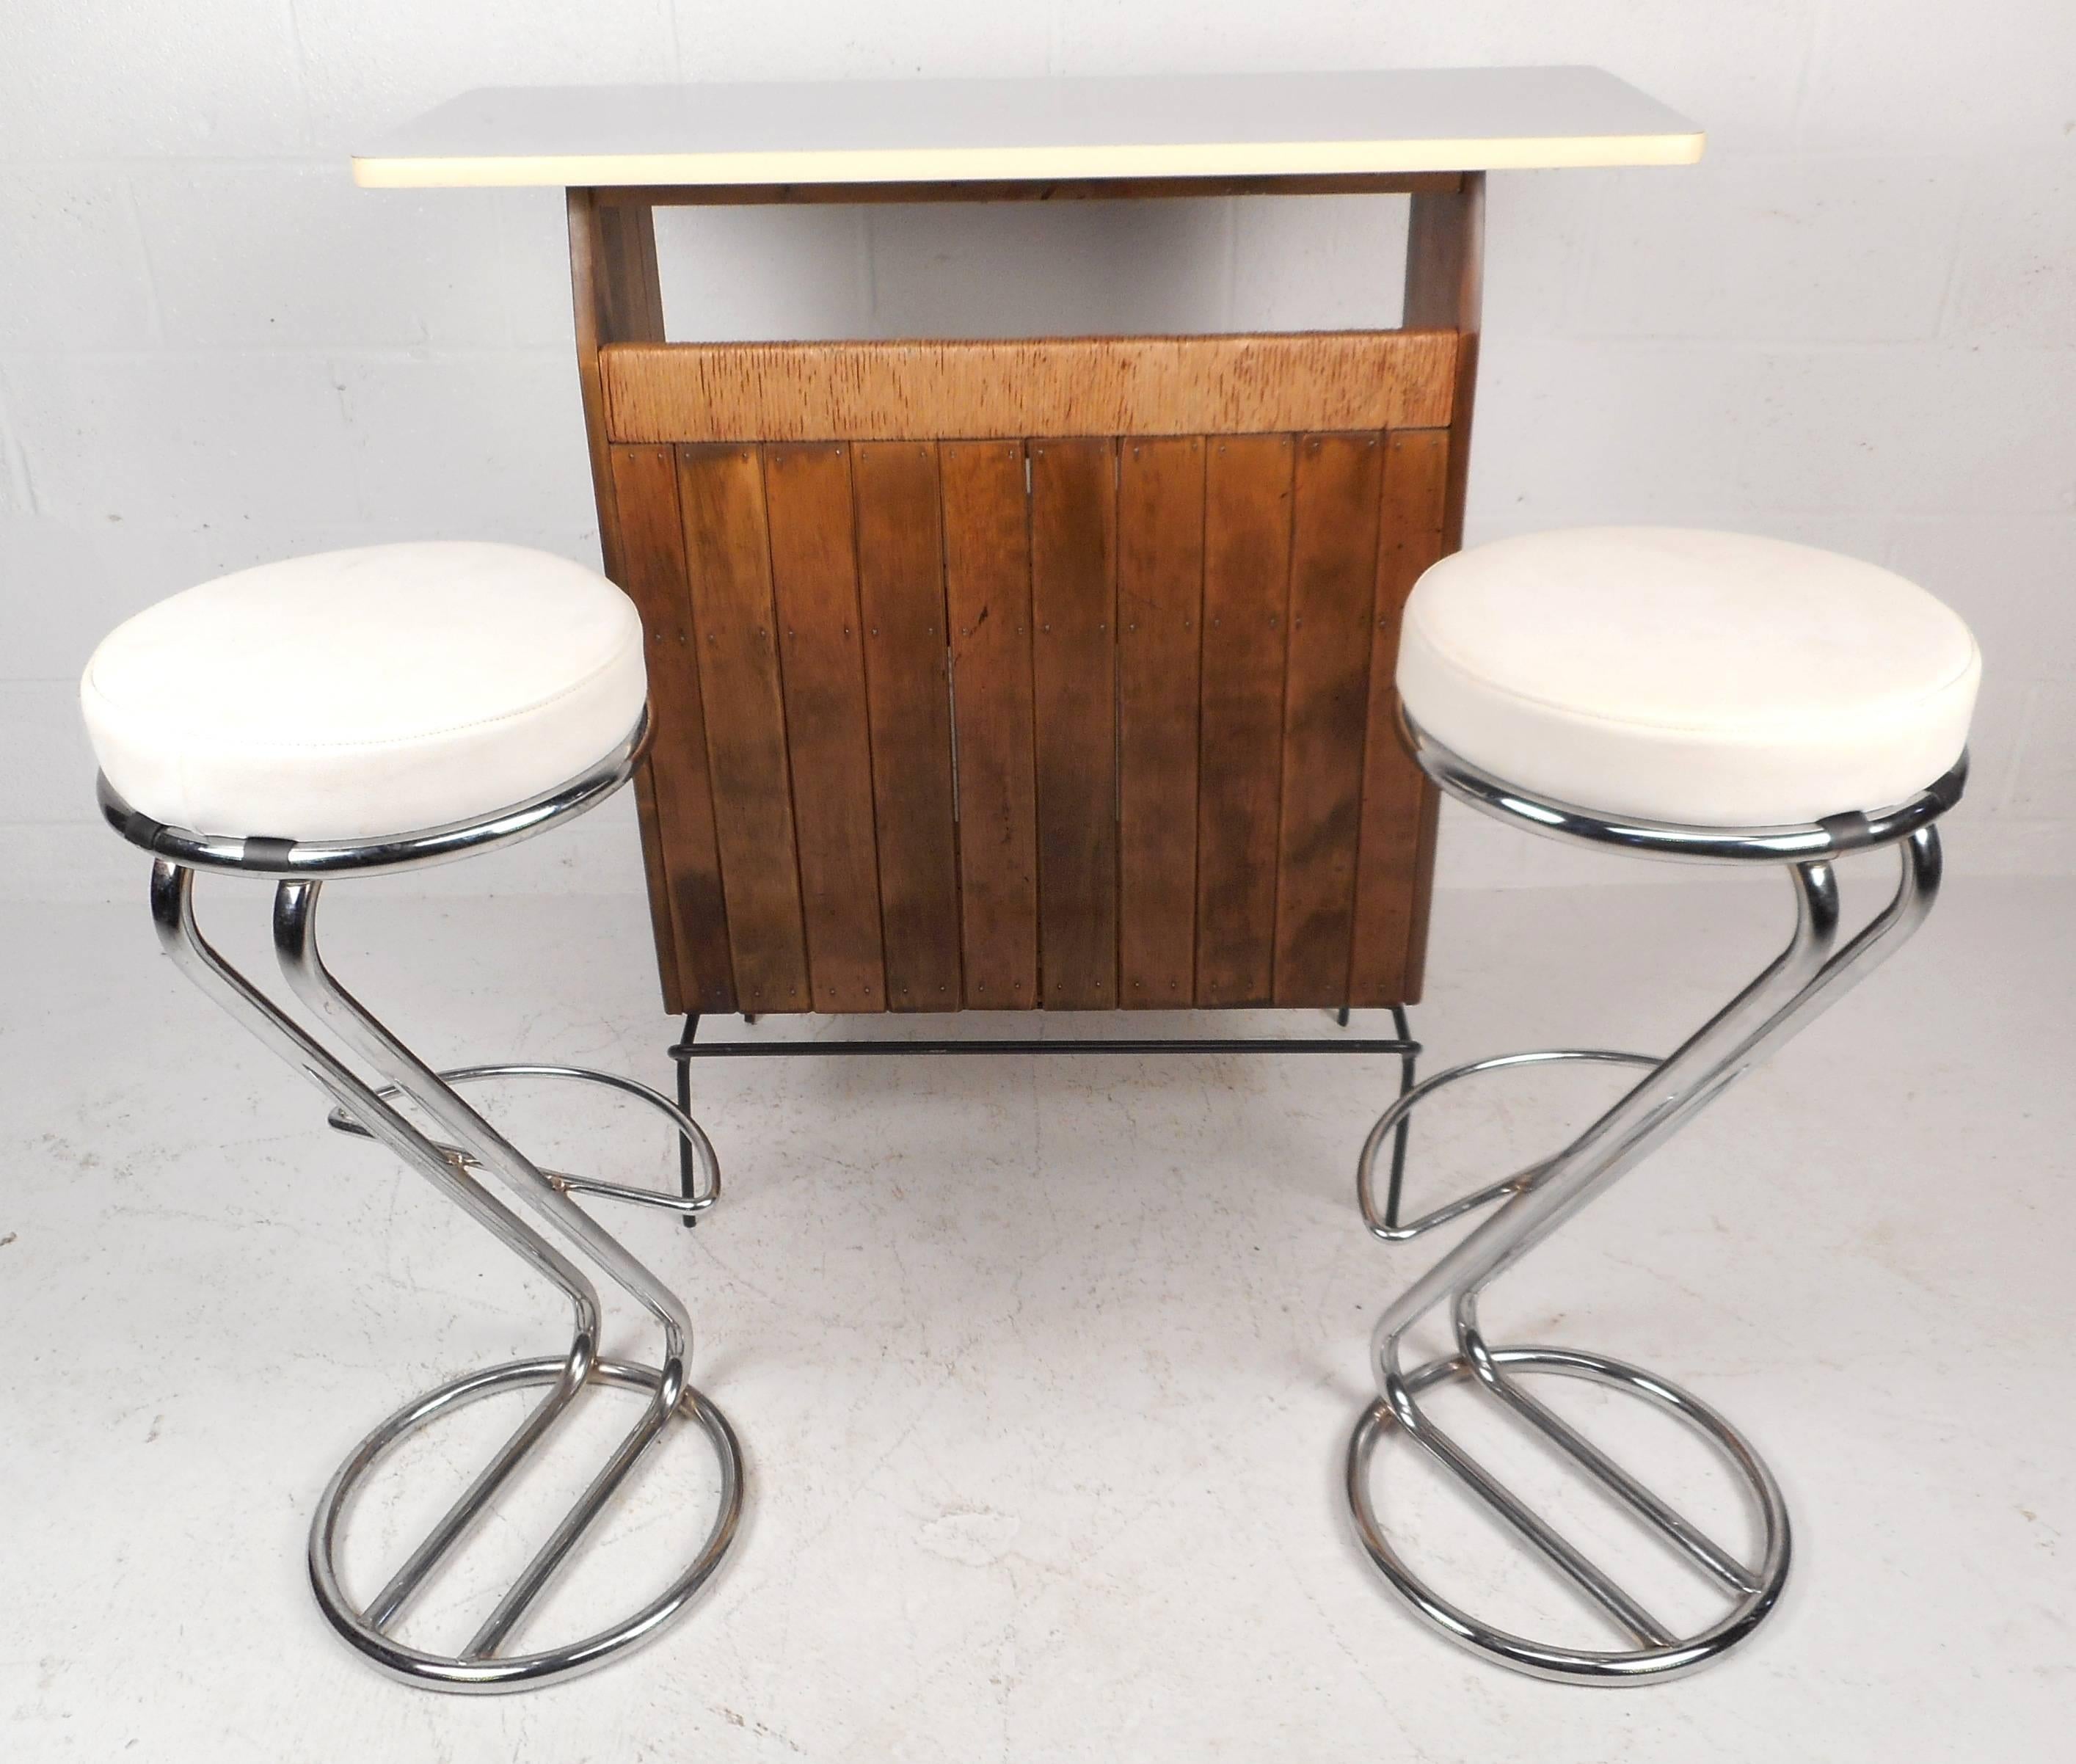 This vintage modern compact dry bar features beautiful raffia detail and open wrought iron framework with a footrest. The sleek bar has a slatted oak front, white formica top and two rear shelves for storage. The versatile design can be used as a